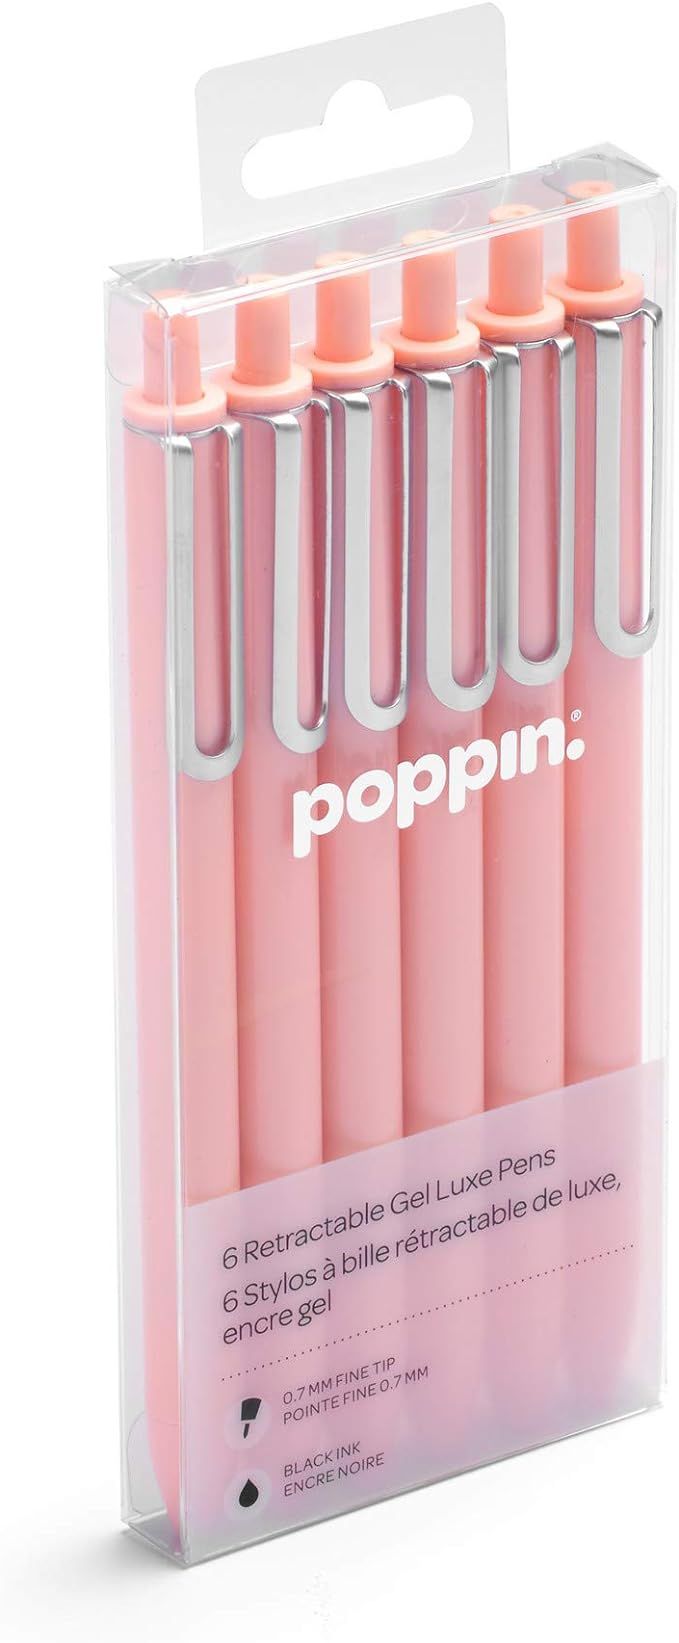 Poppin Retractable Gel Luxe Pens, Blush, Package Of 6, Black Ink | Amazon (US)